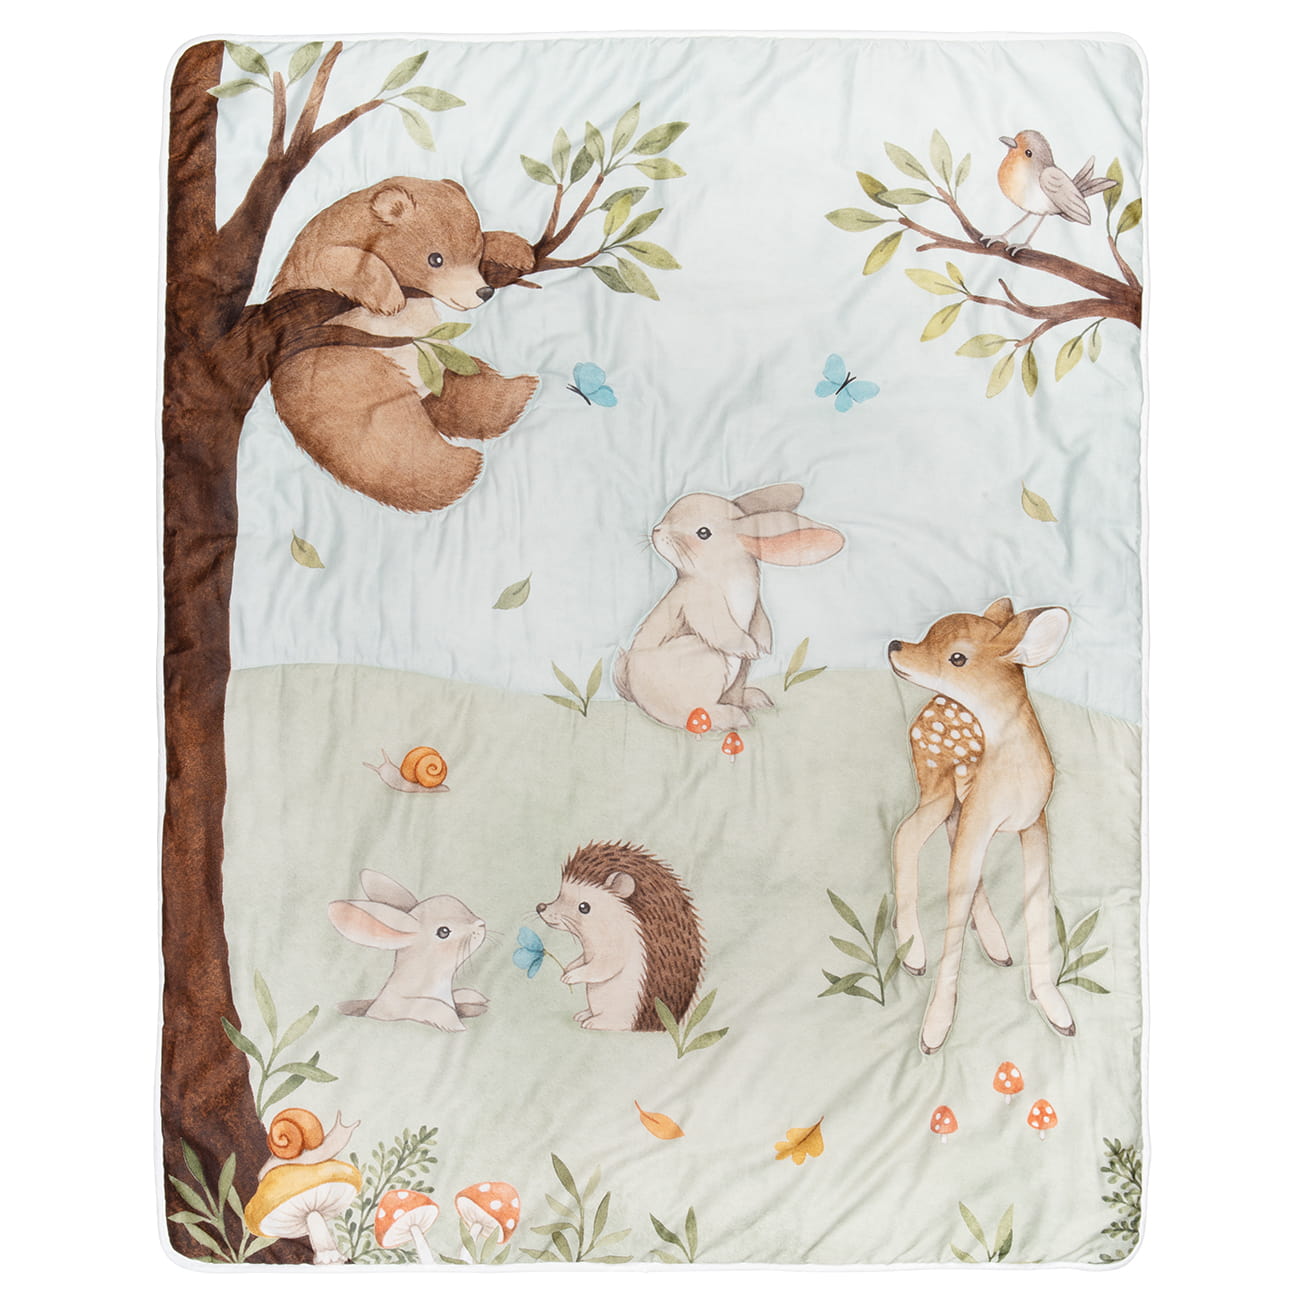 Enchanted forest toddler comforter woodland baby quilt with bear bunny bird fawn hedgehog, forest scene